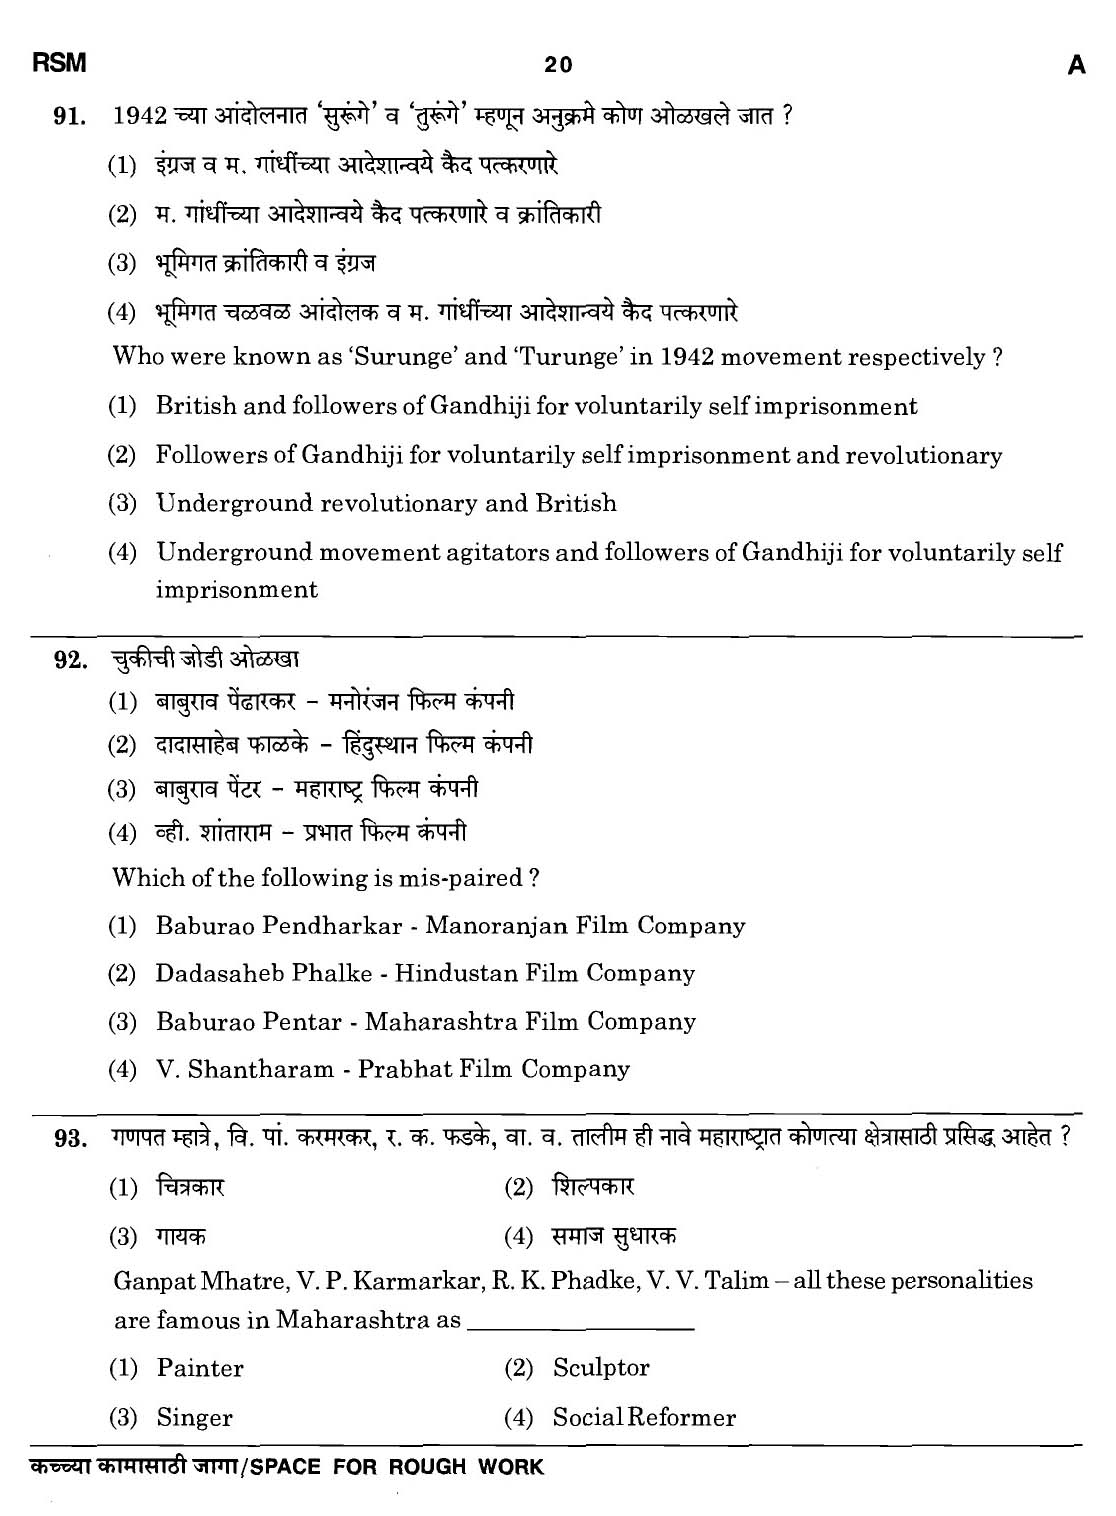 MPSC Agricultural Services Preliminary Exam 2011 Question Paper 19